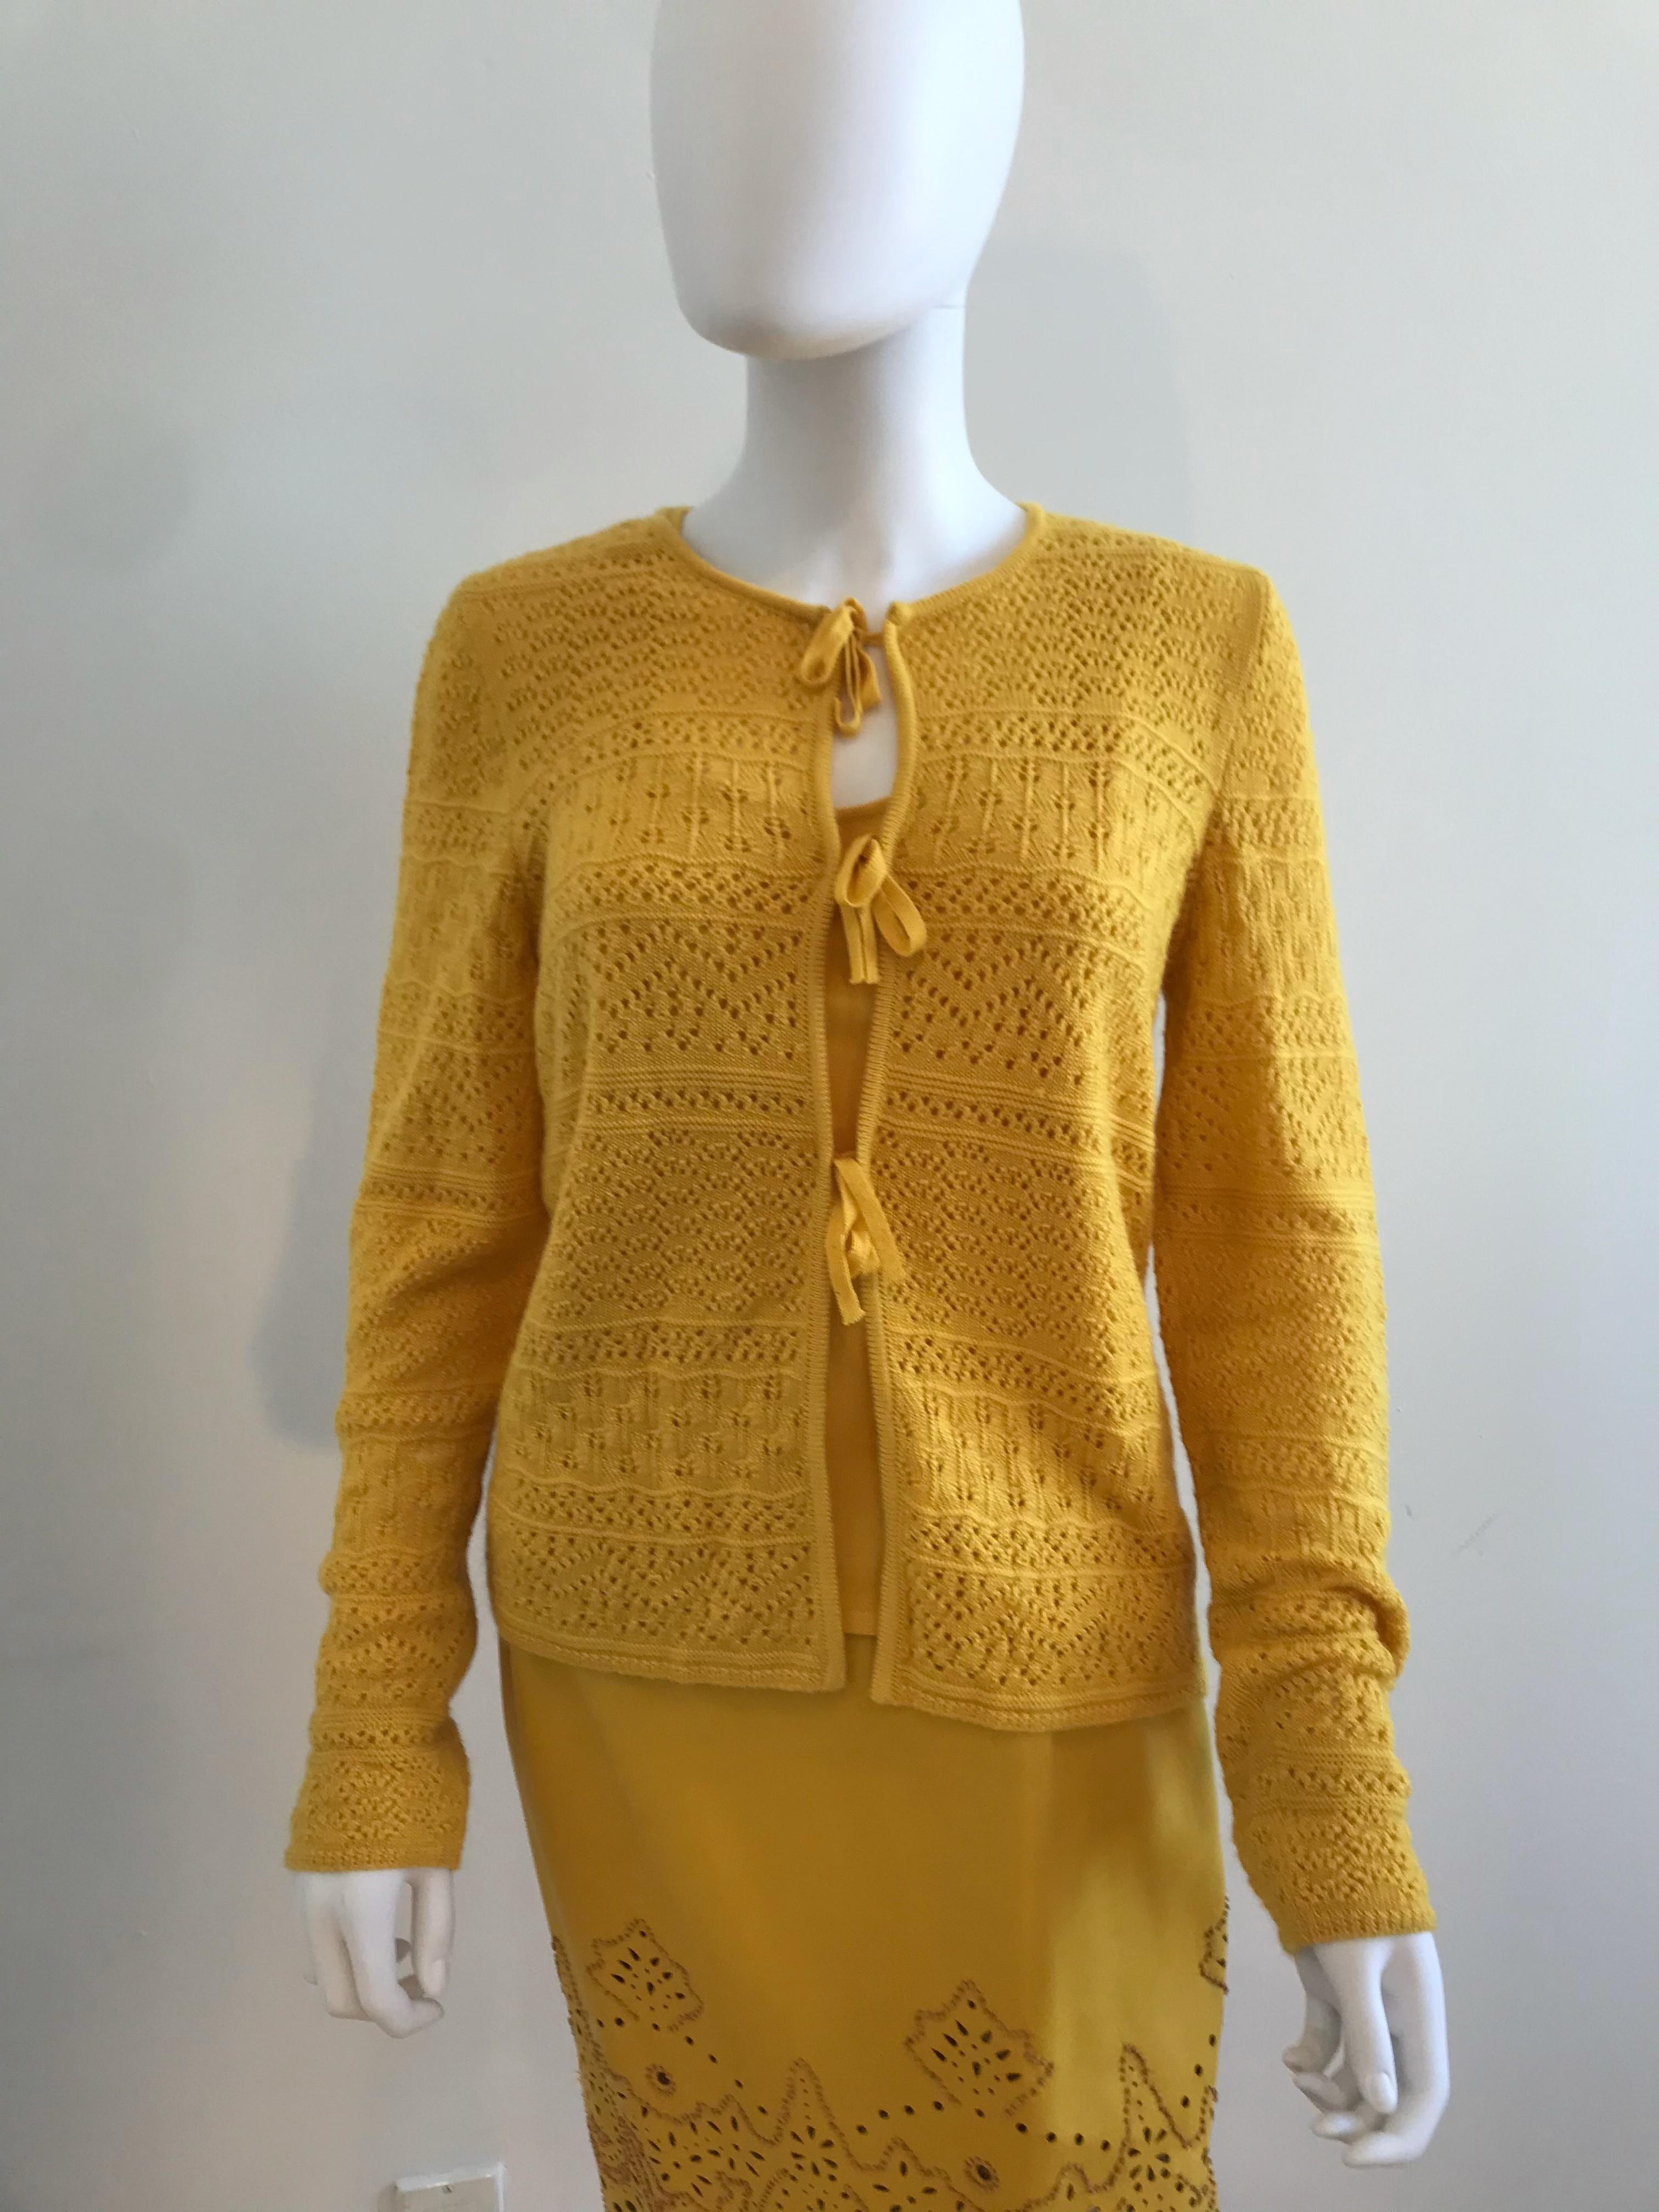 Spring 2000 Oscar De La Renta for Saks Fifth Avenue tank top and button down sweater set. Tie front enclosure. Leather skirt is also available! It is very rare to find ensembles that, through time, stay together. Please inquire and/or take a look at